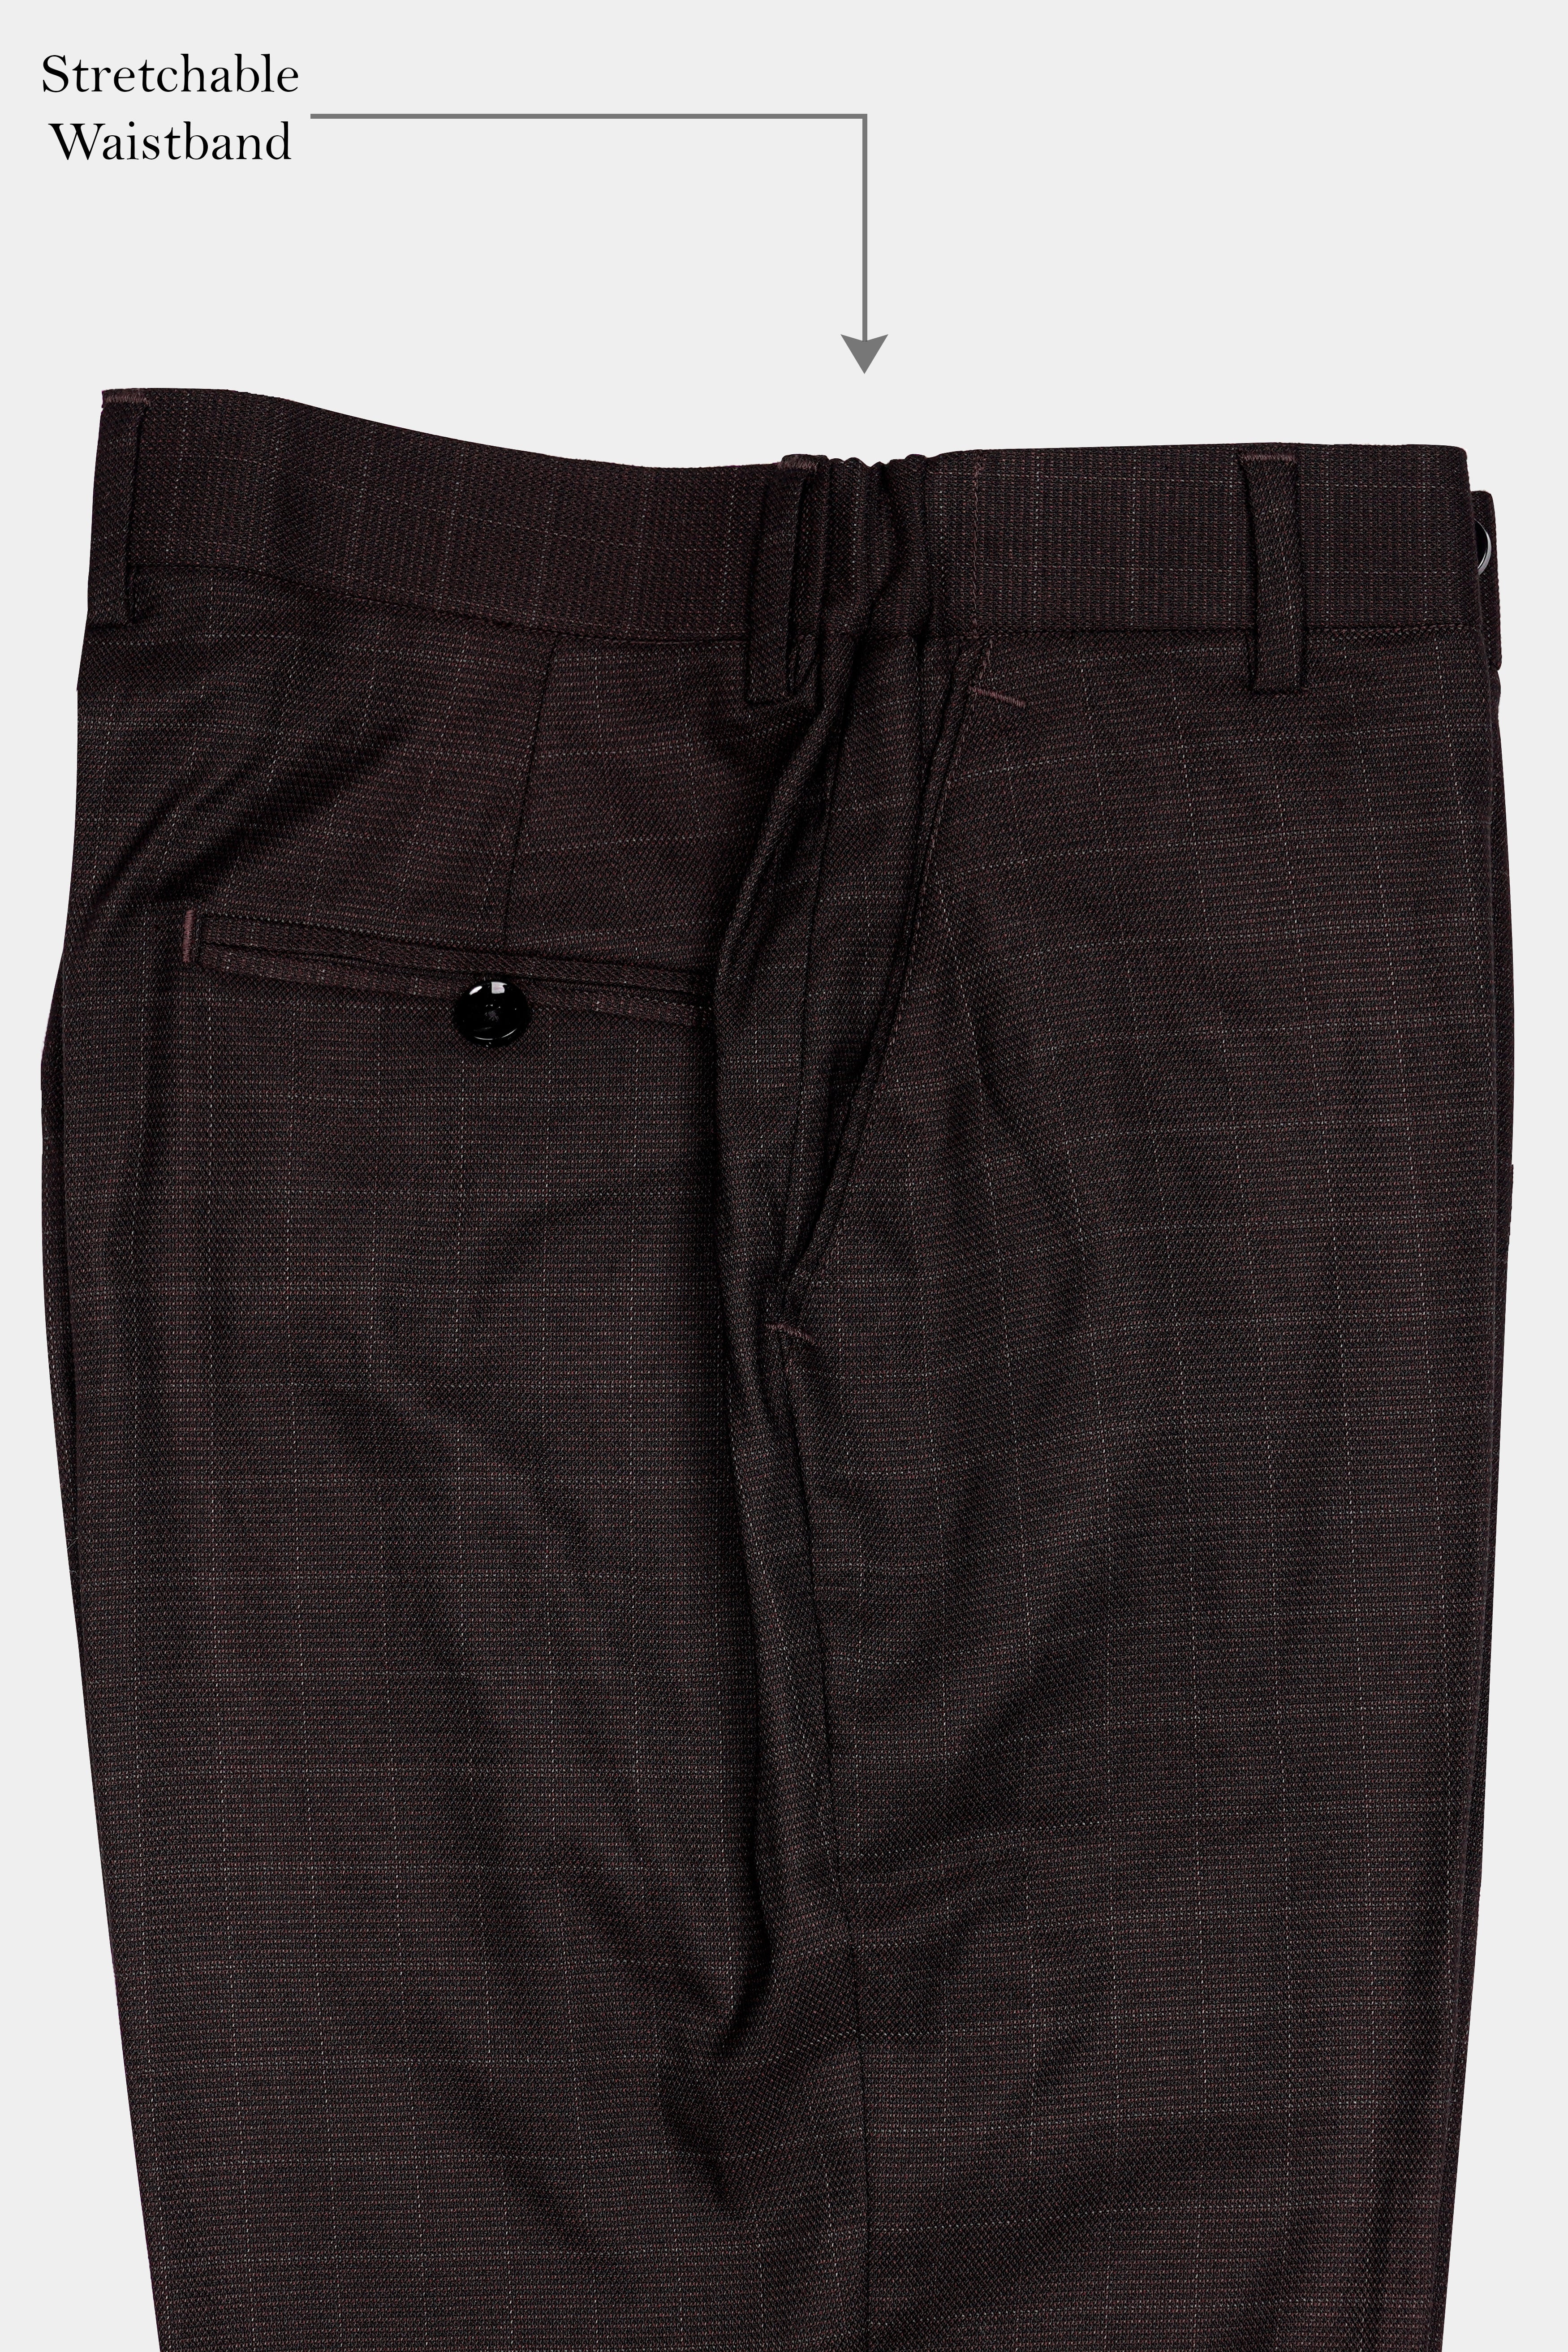 Gondola Brown Checkered Wool Rich Pant T2902-SW-28, T2902-SW-30, T2902-SW-32, T2902-SW-34, T2902-SW-36, T2902-SW-38, T2902-SW-40, T2902-SW-42, T2902-SW-44